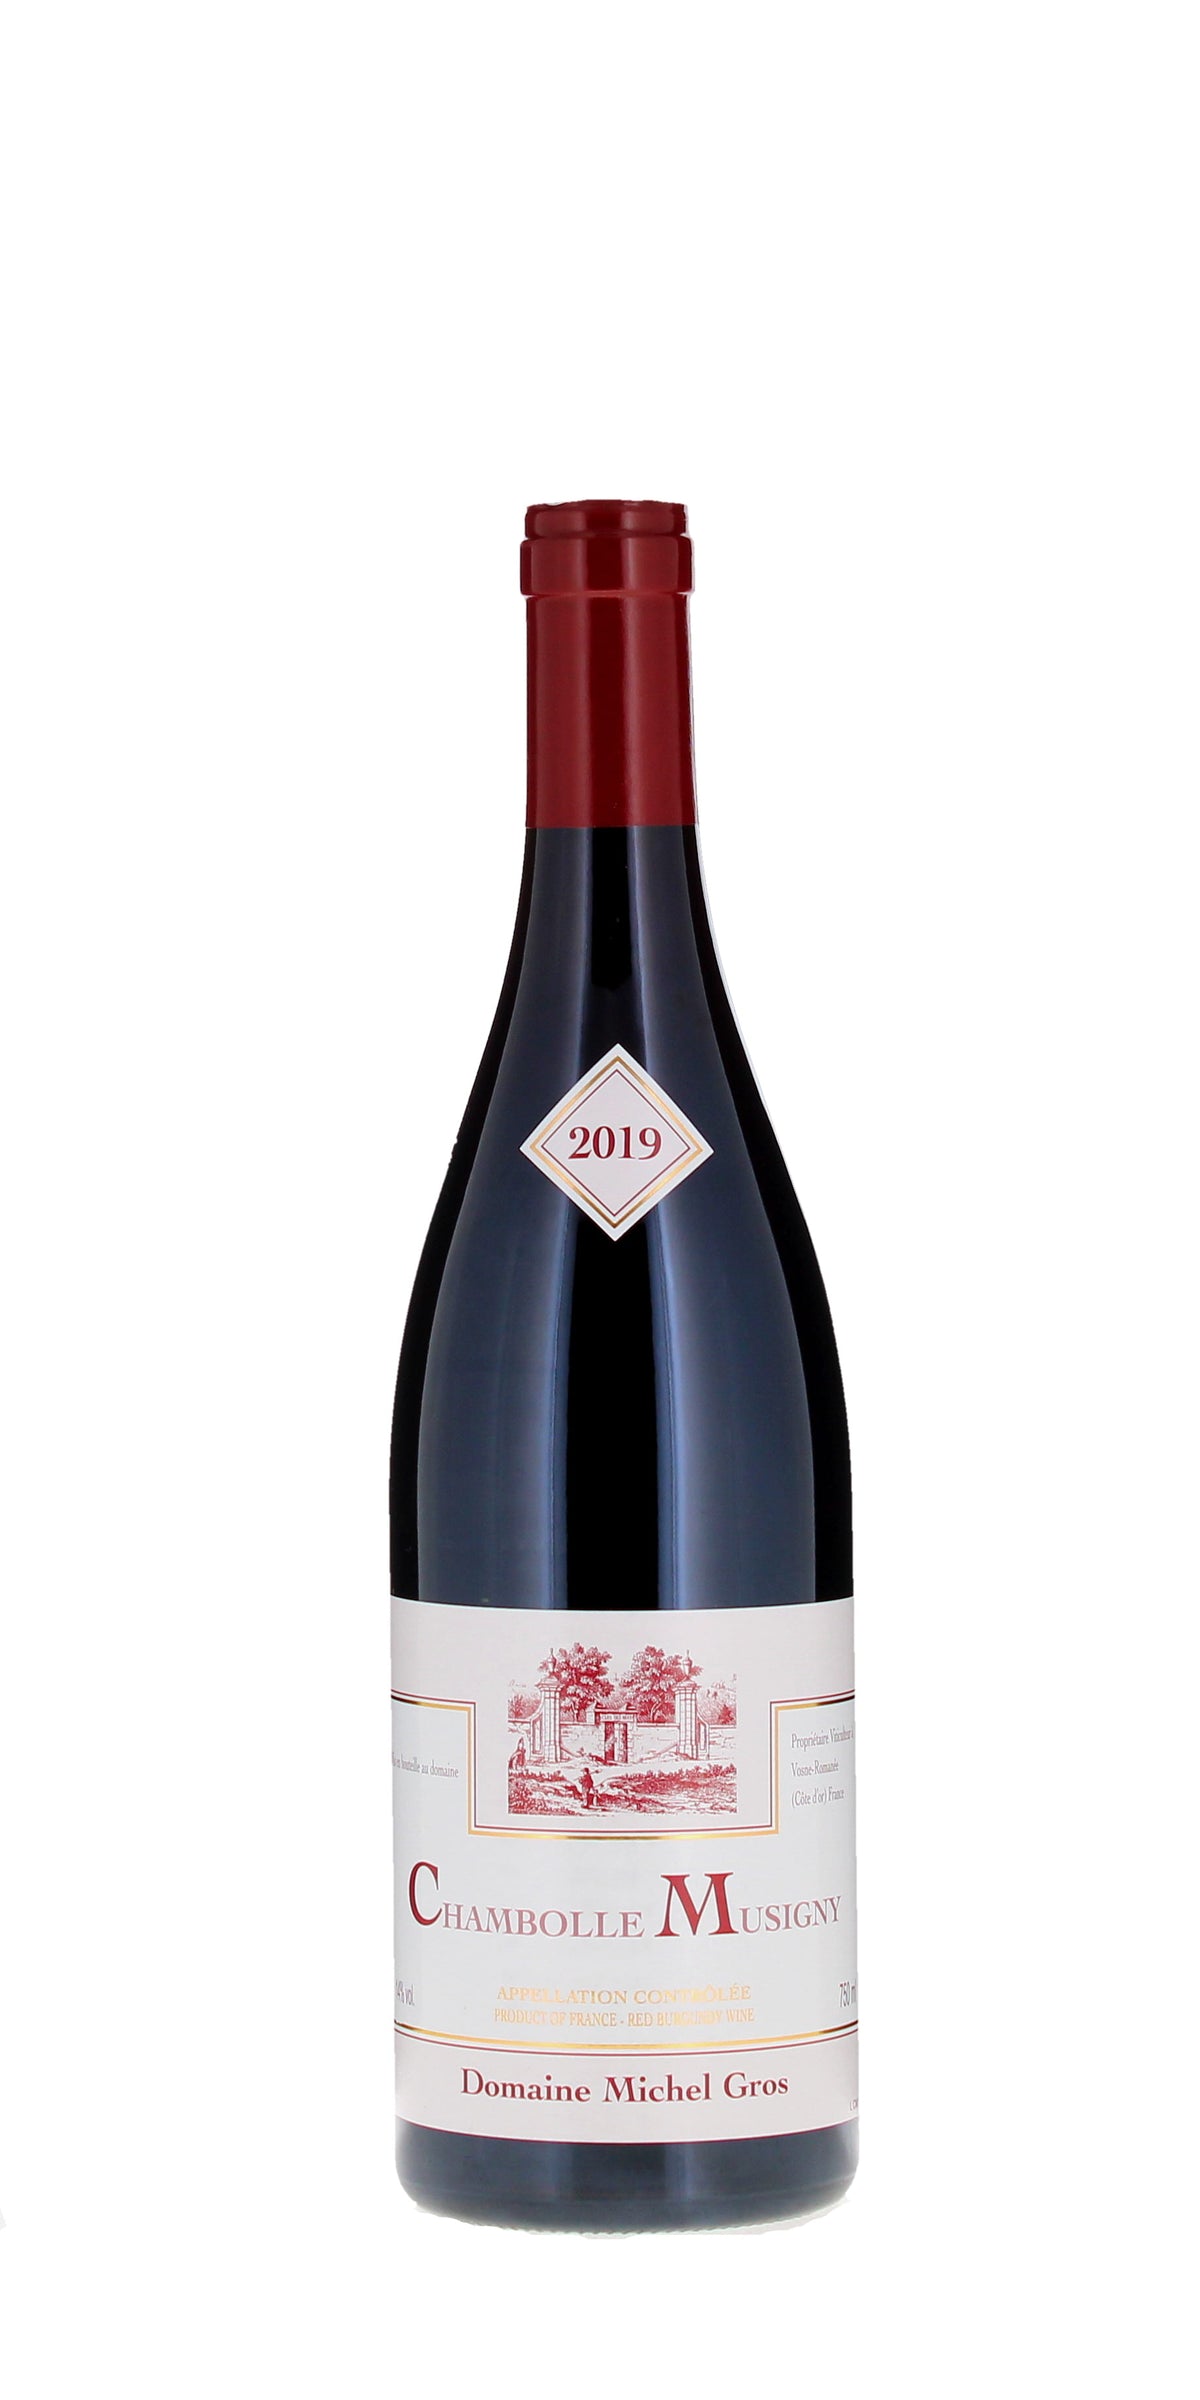 Domaine Michel Gros Chambolle-Musigny, Cote de Nuits, 2019